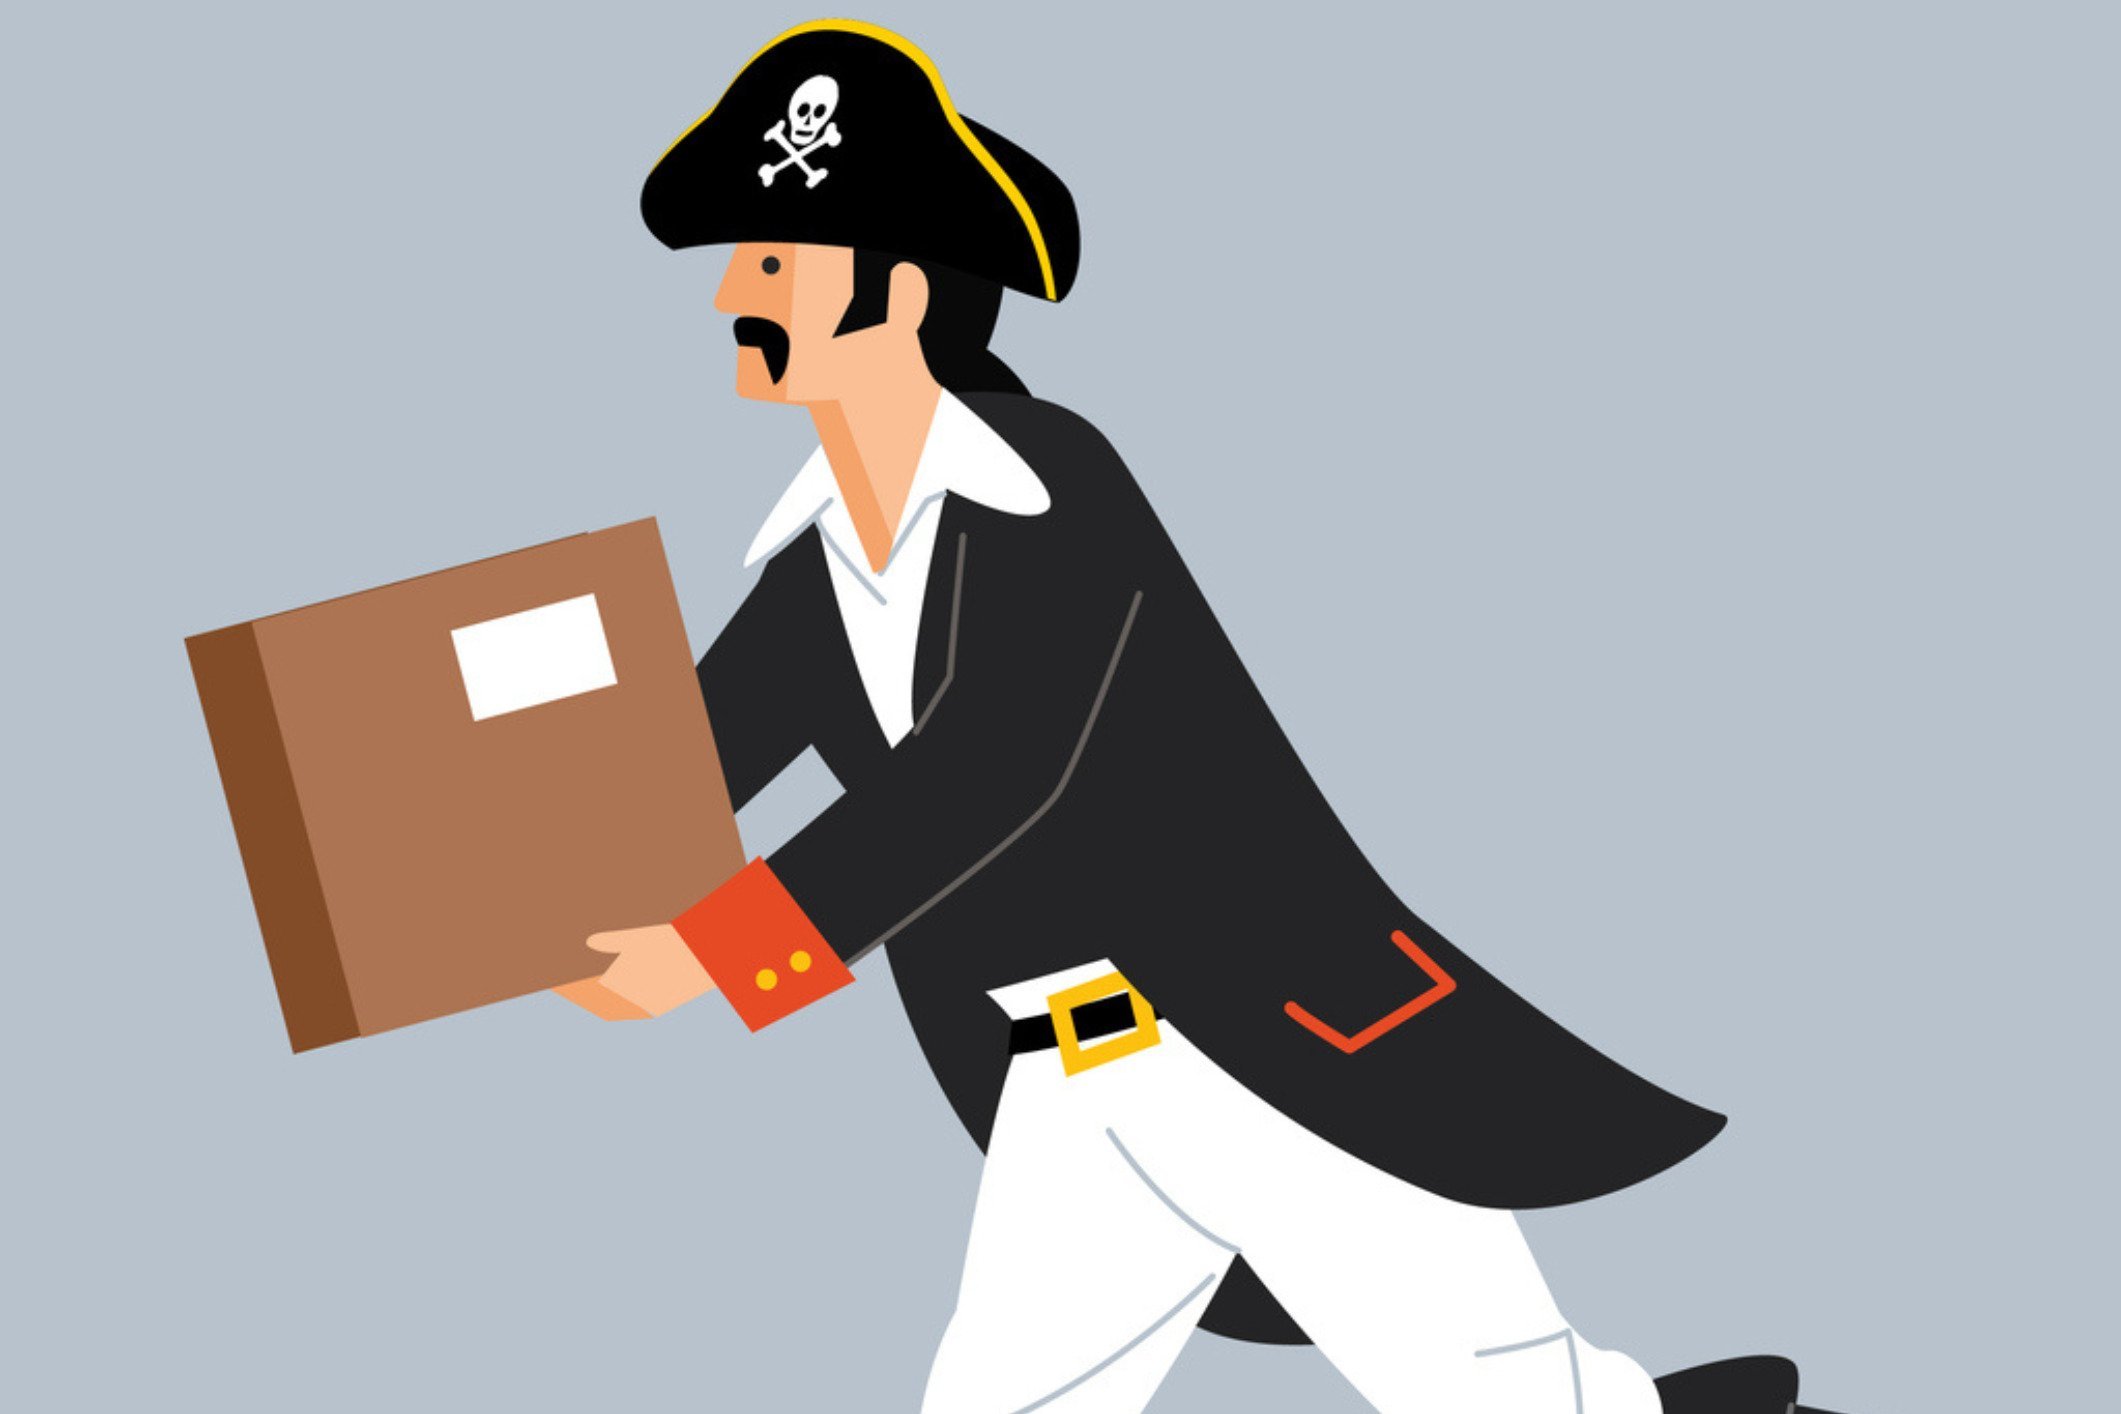 How to Handle Porch Pirates